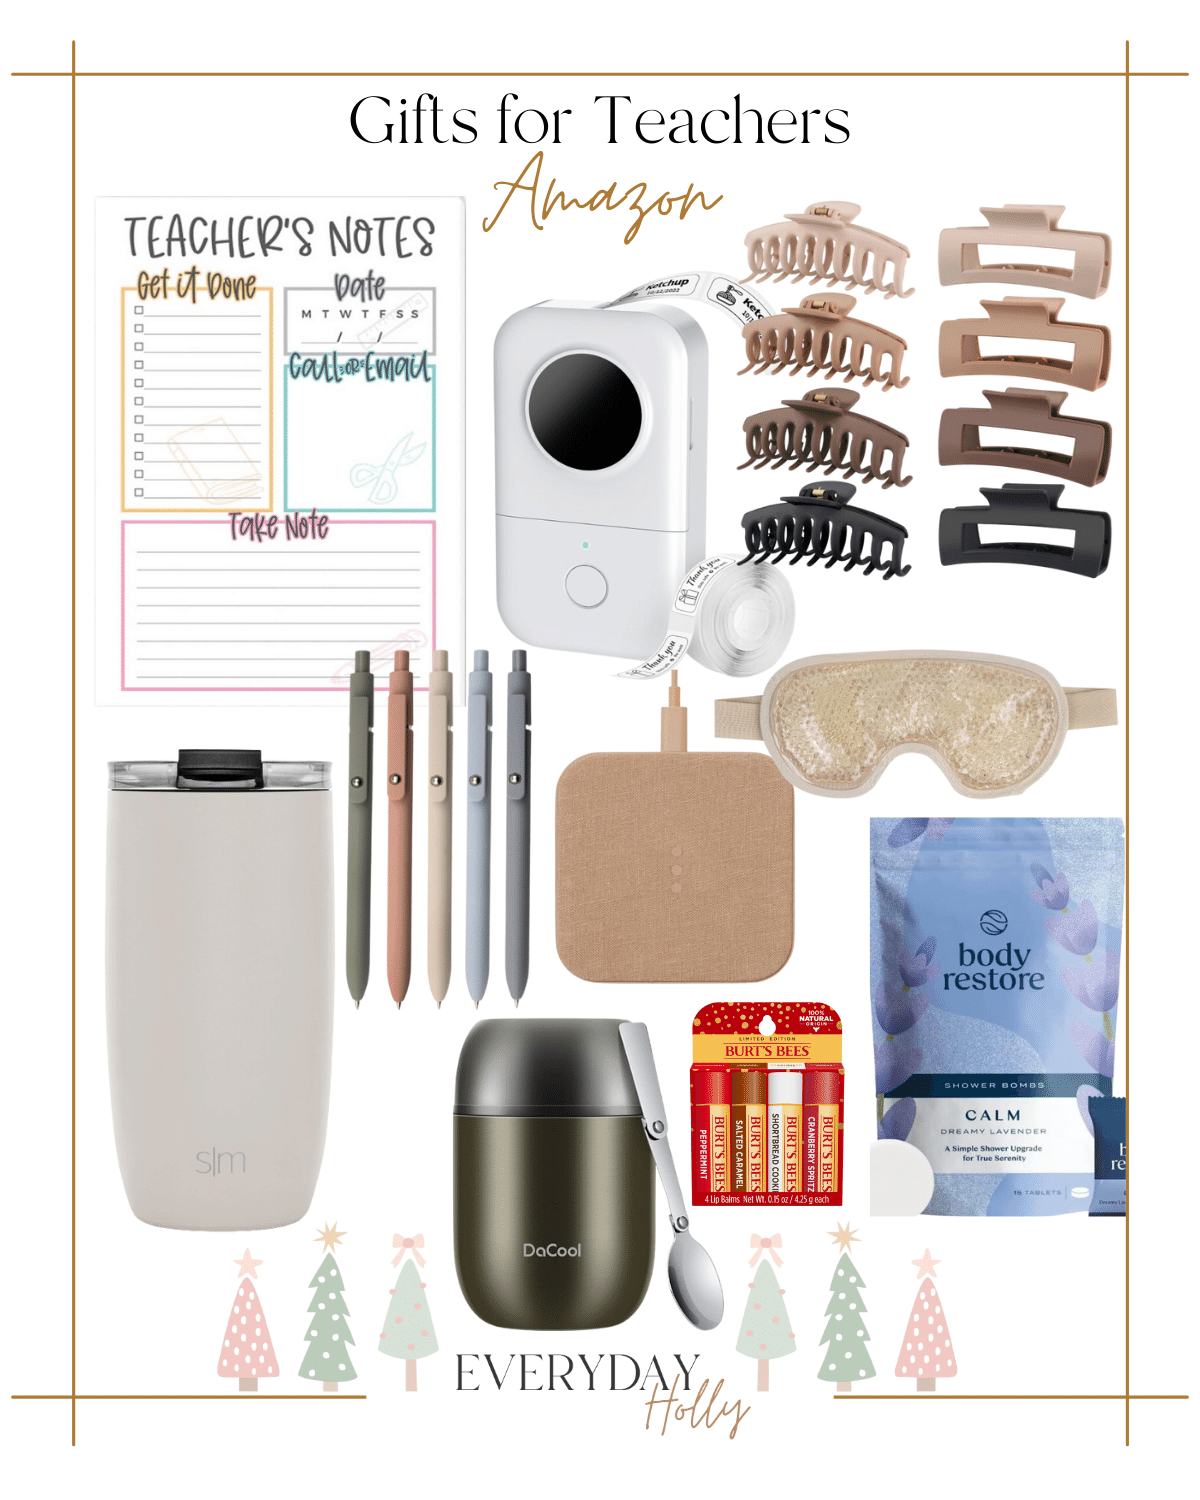 10 Holiday Gift Guides for Everyone This Season | #holiday #giftguide #giftideas #2023 #christmas #gifts #amazon #giftsforteachers #teacher #notepad #minilabelmaker #clawclip #hairaccessories #pens #travelmug #thermos #chargingpad #eyemask #showersteamers #burtsbees